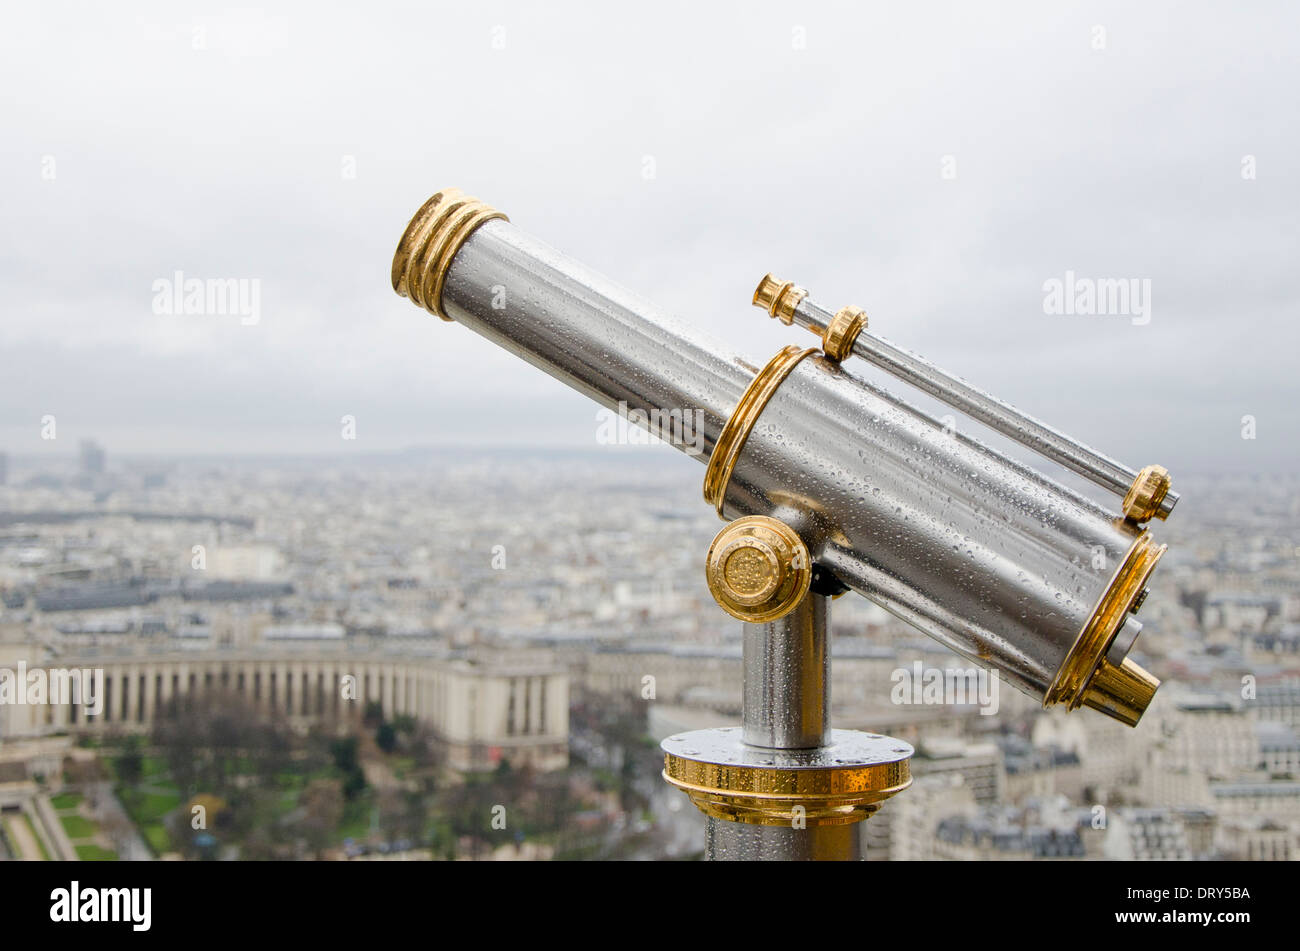 Telescope at second level of Eiffel Tower with Trocadero in background, Paris, France. Stock Photo